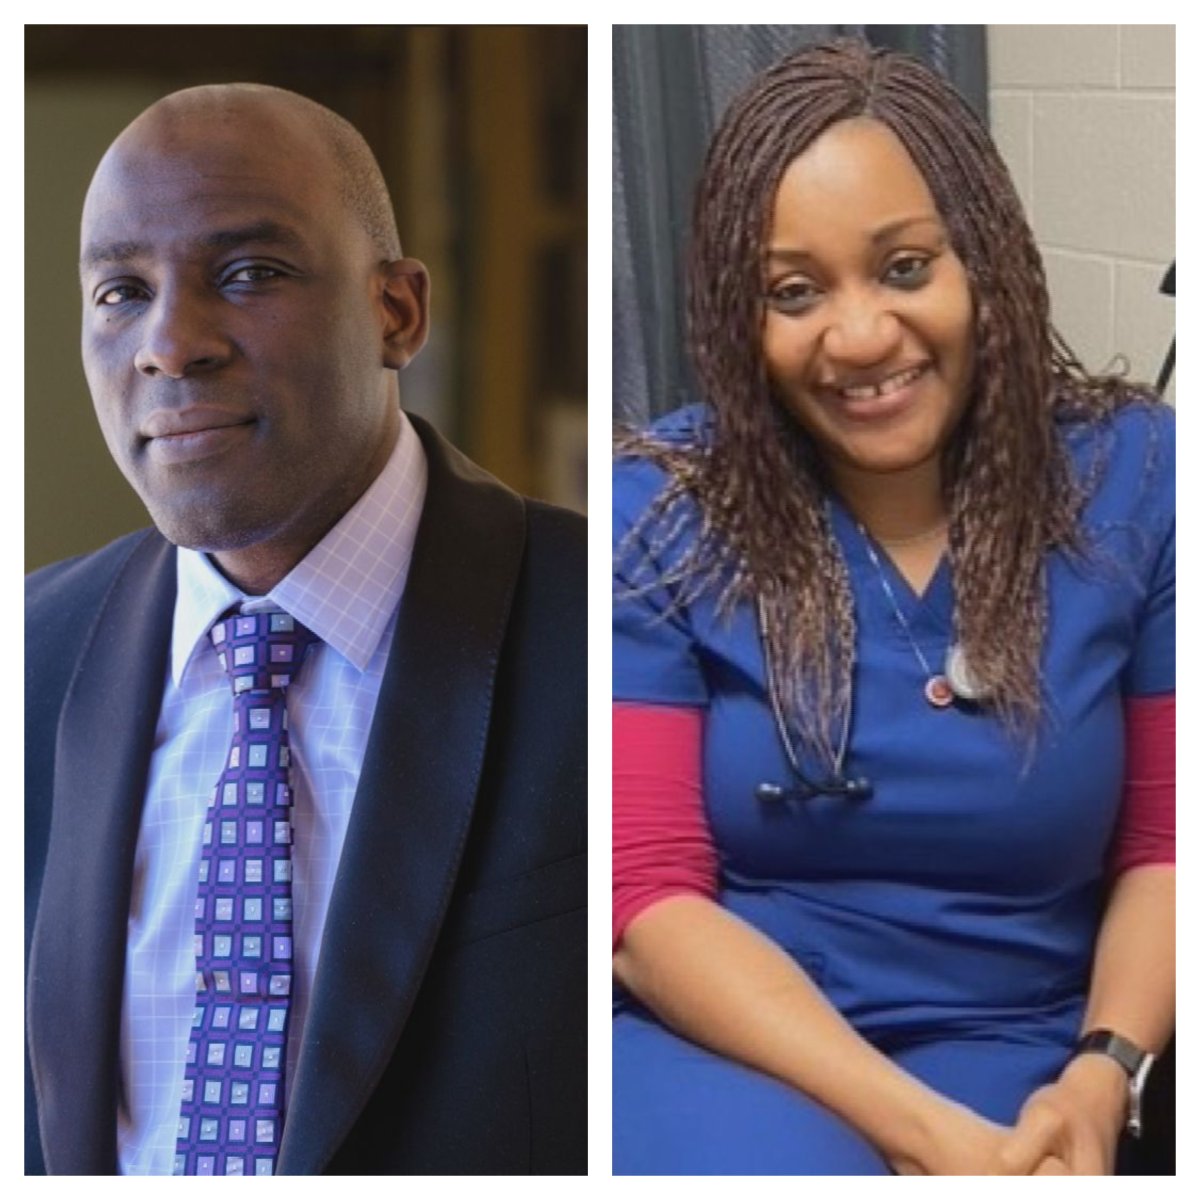 Dr. Emmanuel Ajuwon (left) has taken his own initiative to offer mentoring to other international medical graduates (IMGs) like Dr. Stephanie Ofoegbu (right).